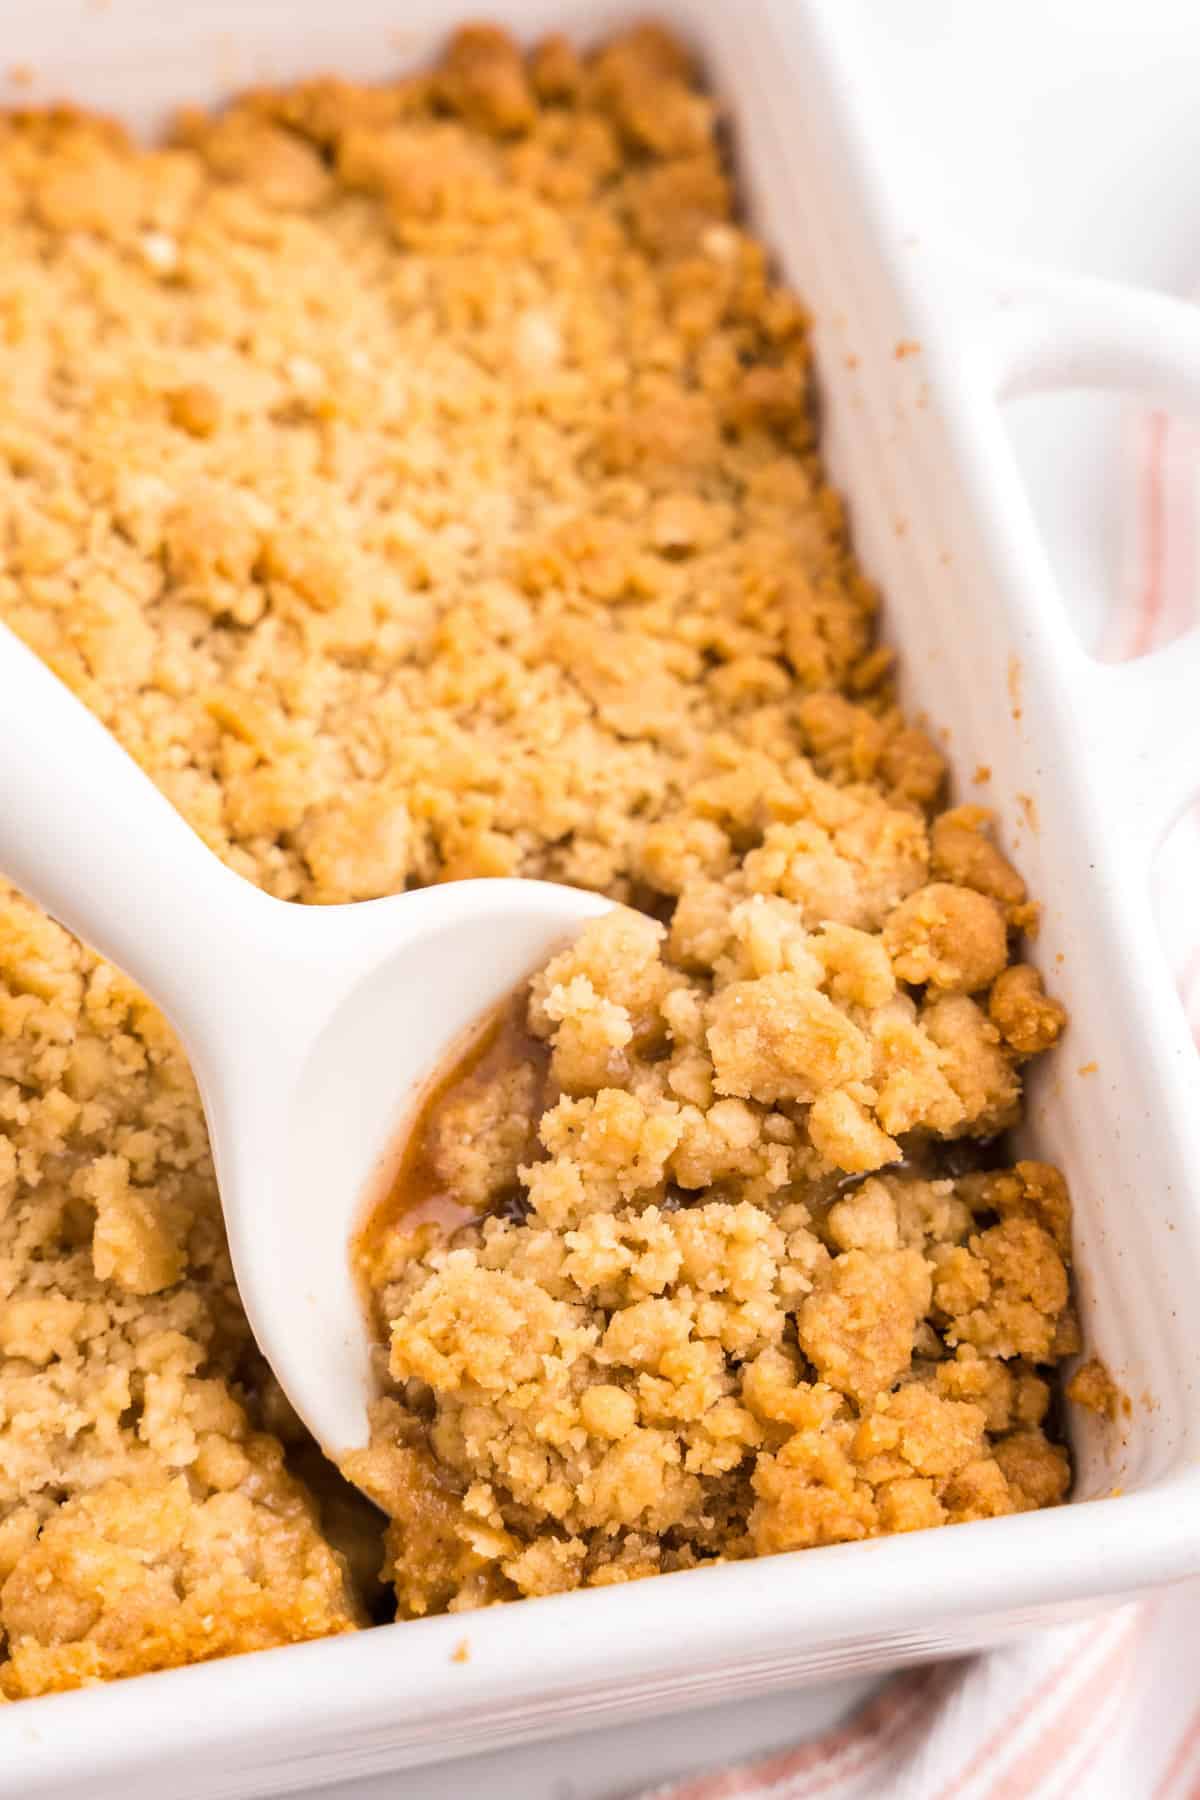 Scooping Apple Crumble from square baking dish